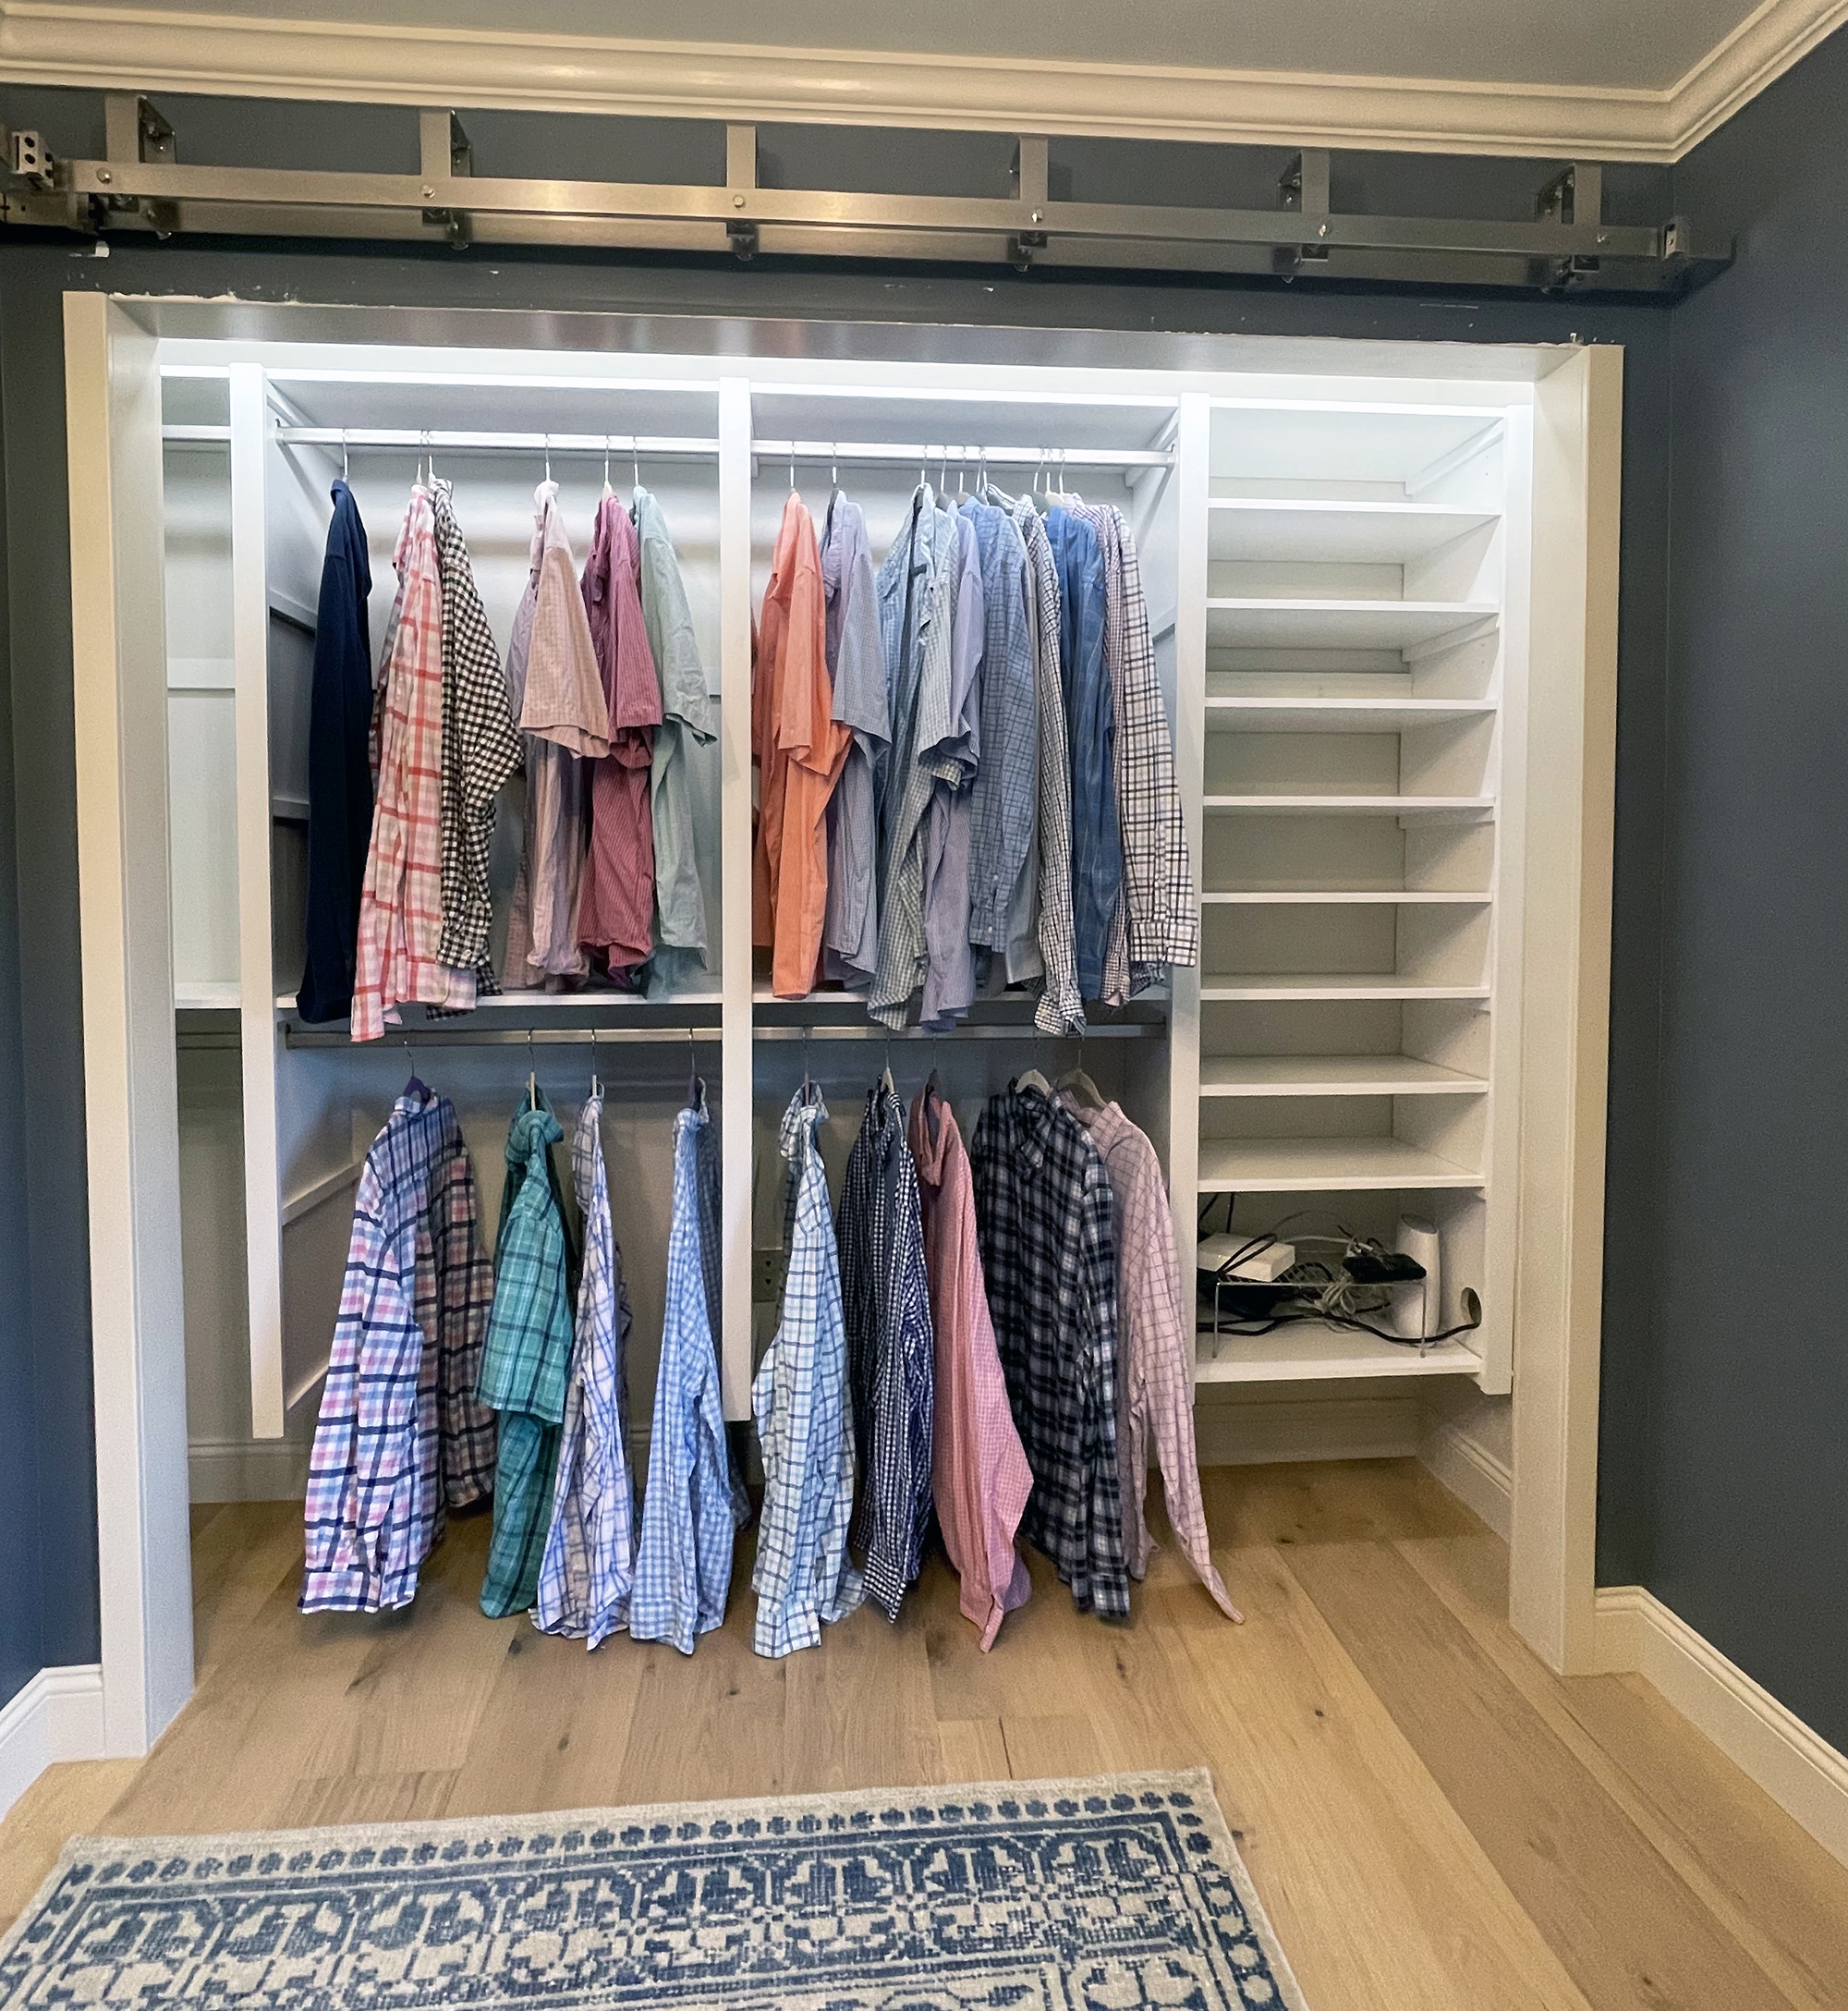 6 Storage Organizing Tips for Small Spaces - Victory Closets